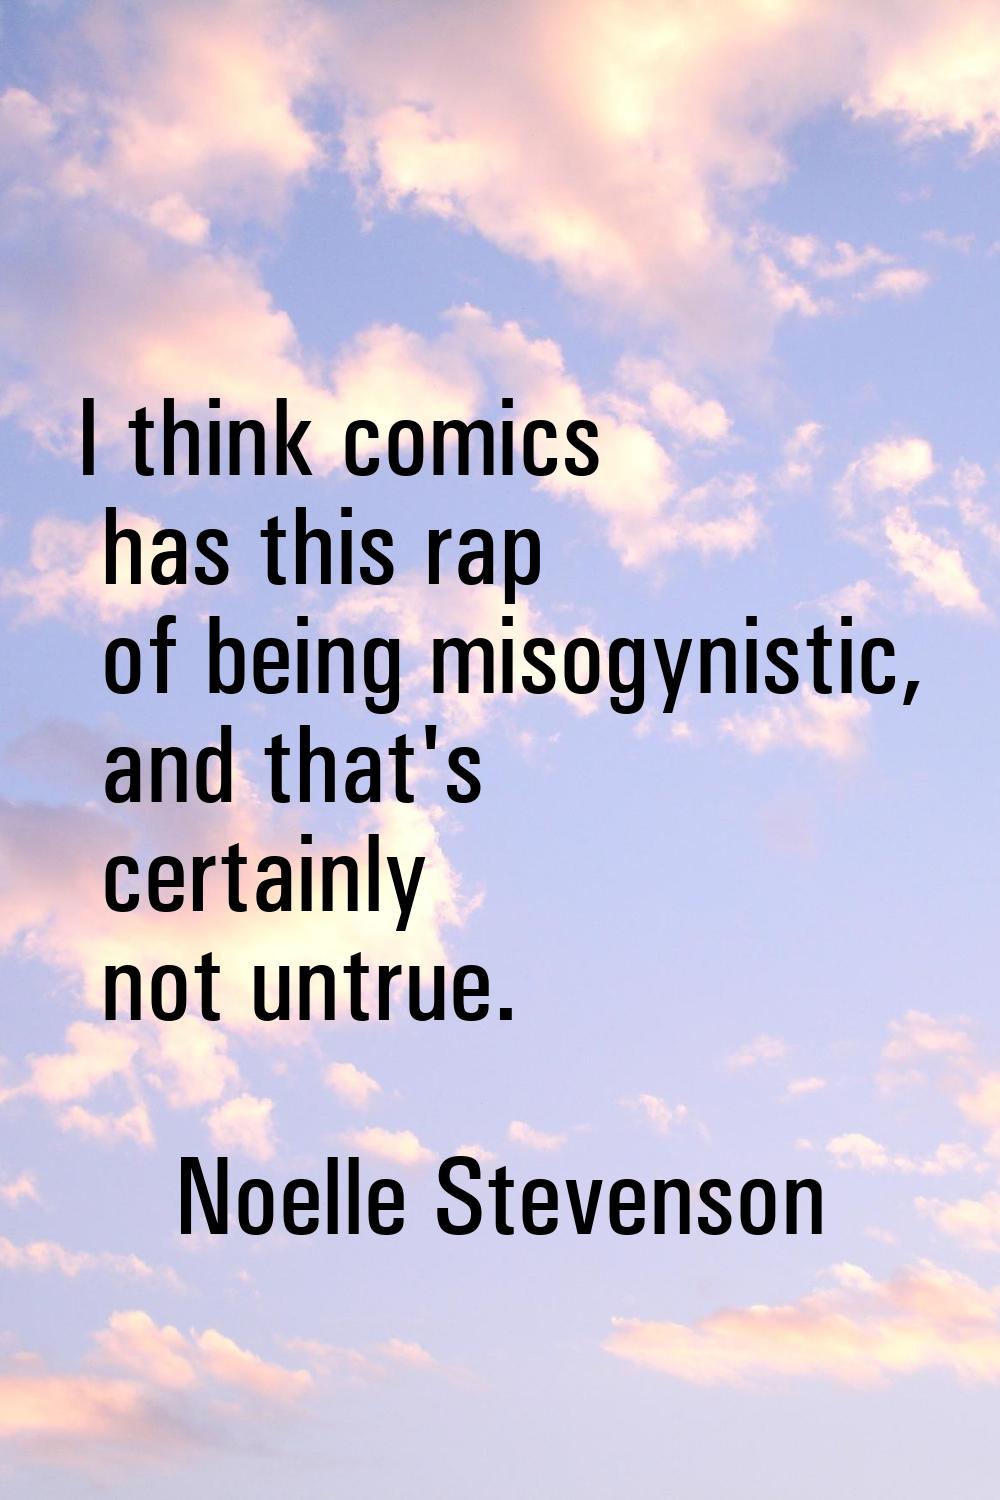 I think comics has this rap of being misogynistic, and that's certainly not untrue.